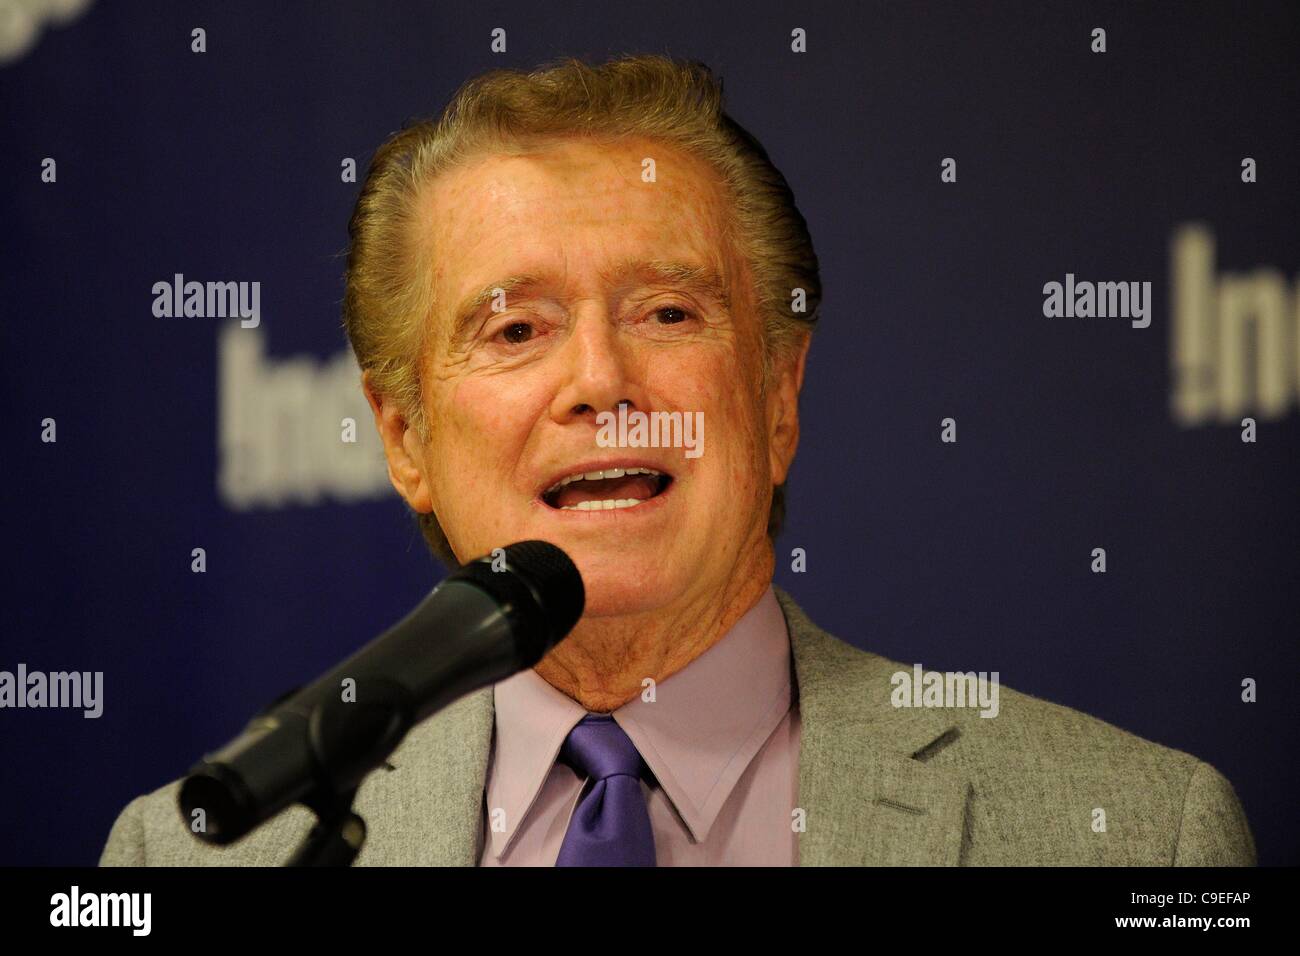 Regis Philbin at in-store appearance for Regis Philbin Book Signing for HOW I GOT THIS WAY, Indigo Bookstore in Manulife Centre, Toronto, ON December 6, 2011. Photo By: Nicole Springer/Everett Collection Stock Photo